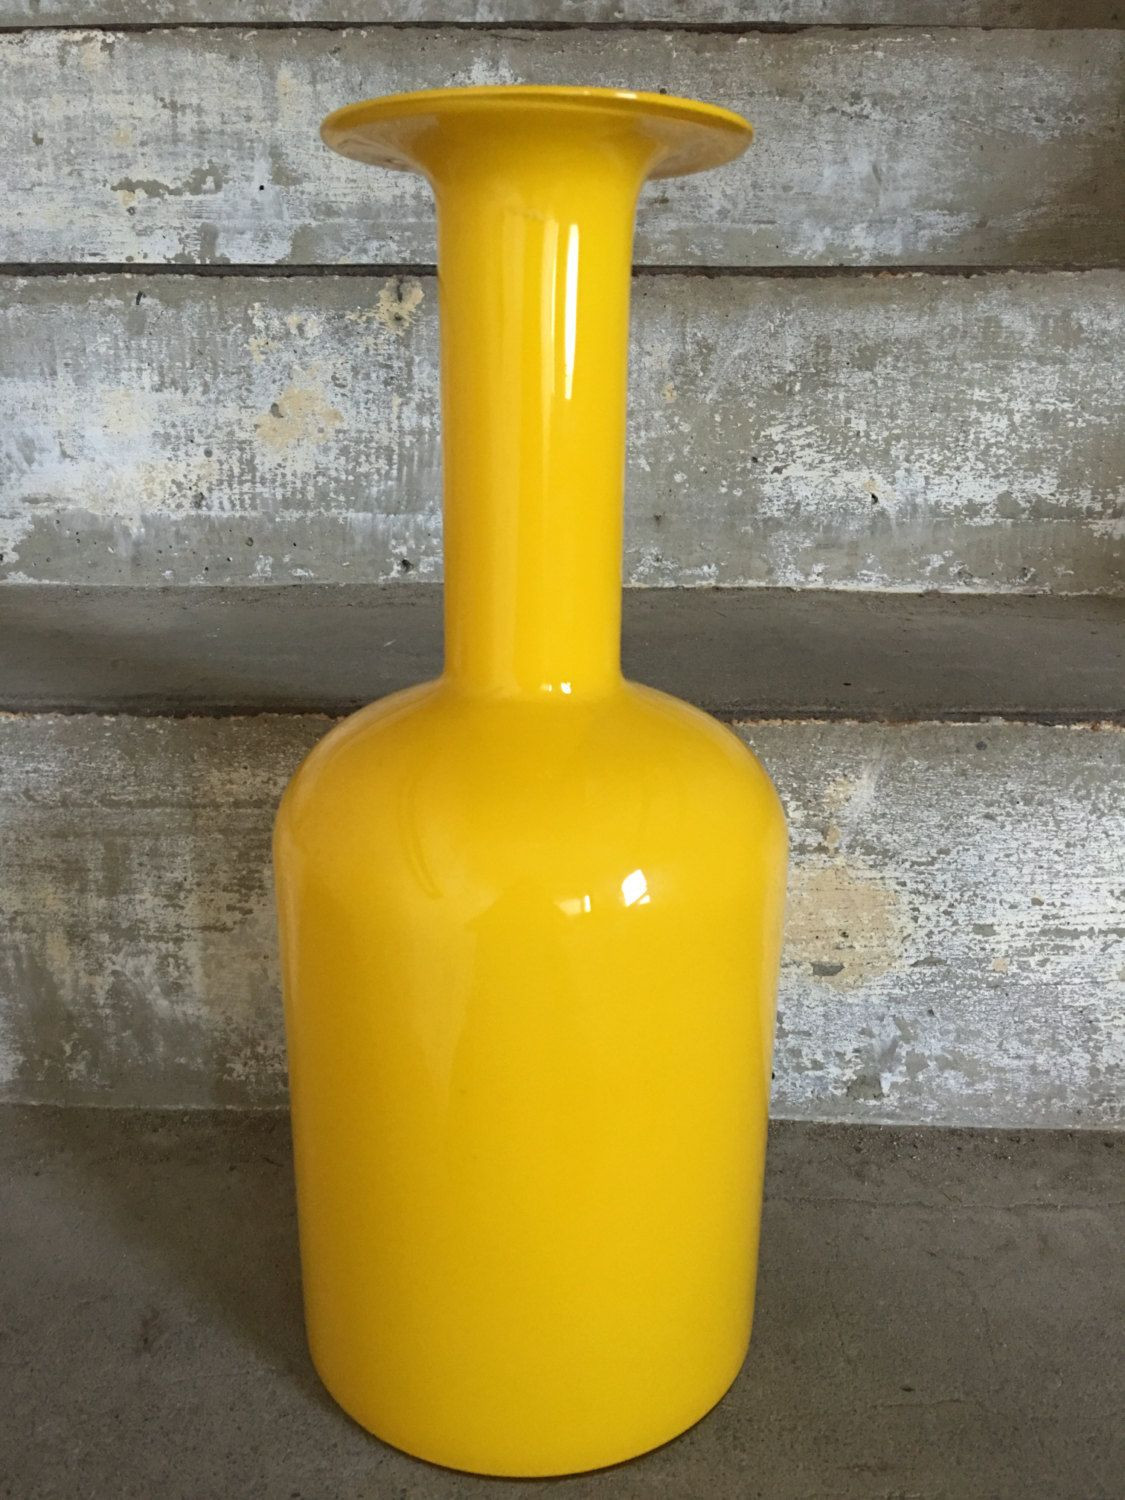 10 Spectacular Antique Yellow Glass Vase 2024 free download antique yellow glass vase of holmegaard otto brauer danish yellow glass gulvase vase otto inside holmegaard otto brauer danish yellow glass gulvase vase otto brauer bottle vase for holmegaar